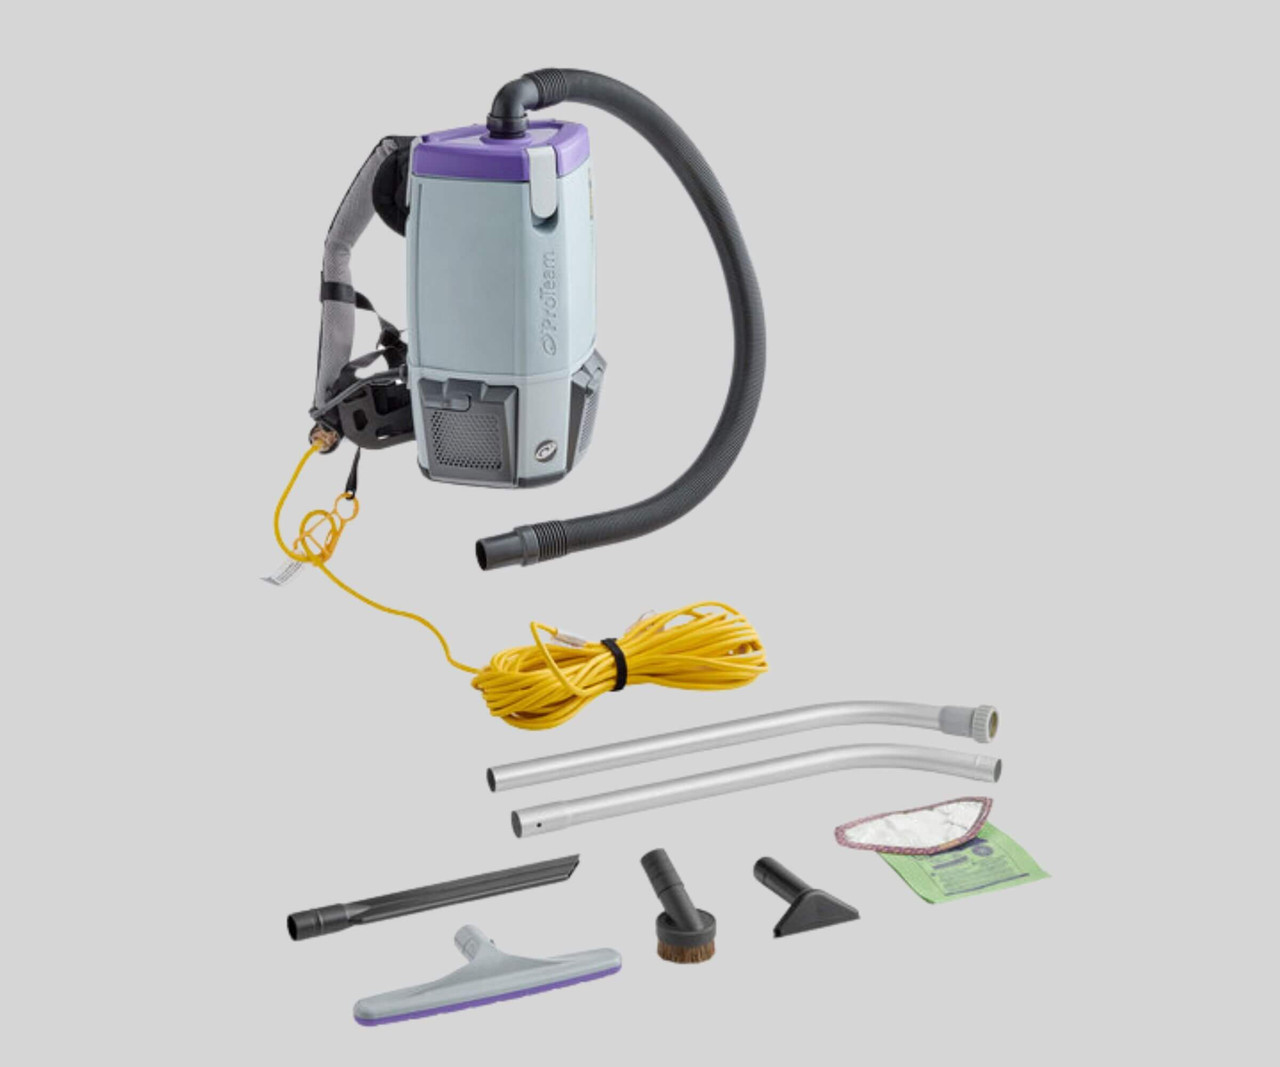 ProTeam Super Coach Pro 6 Qt. Backpack Vacuum with 107098 Xover Multi-Surface Two-Piece Telescoping Wand Kit - Efficient Cleaning with Versatile Accessories